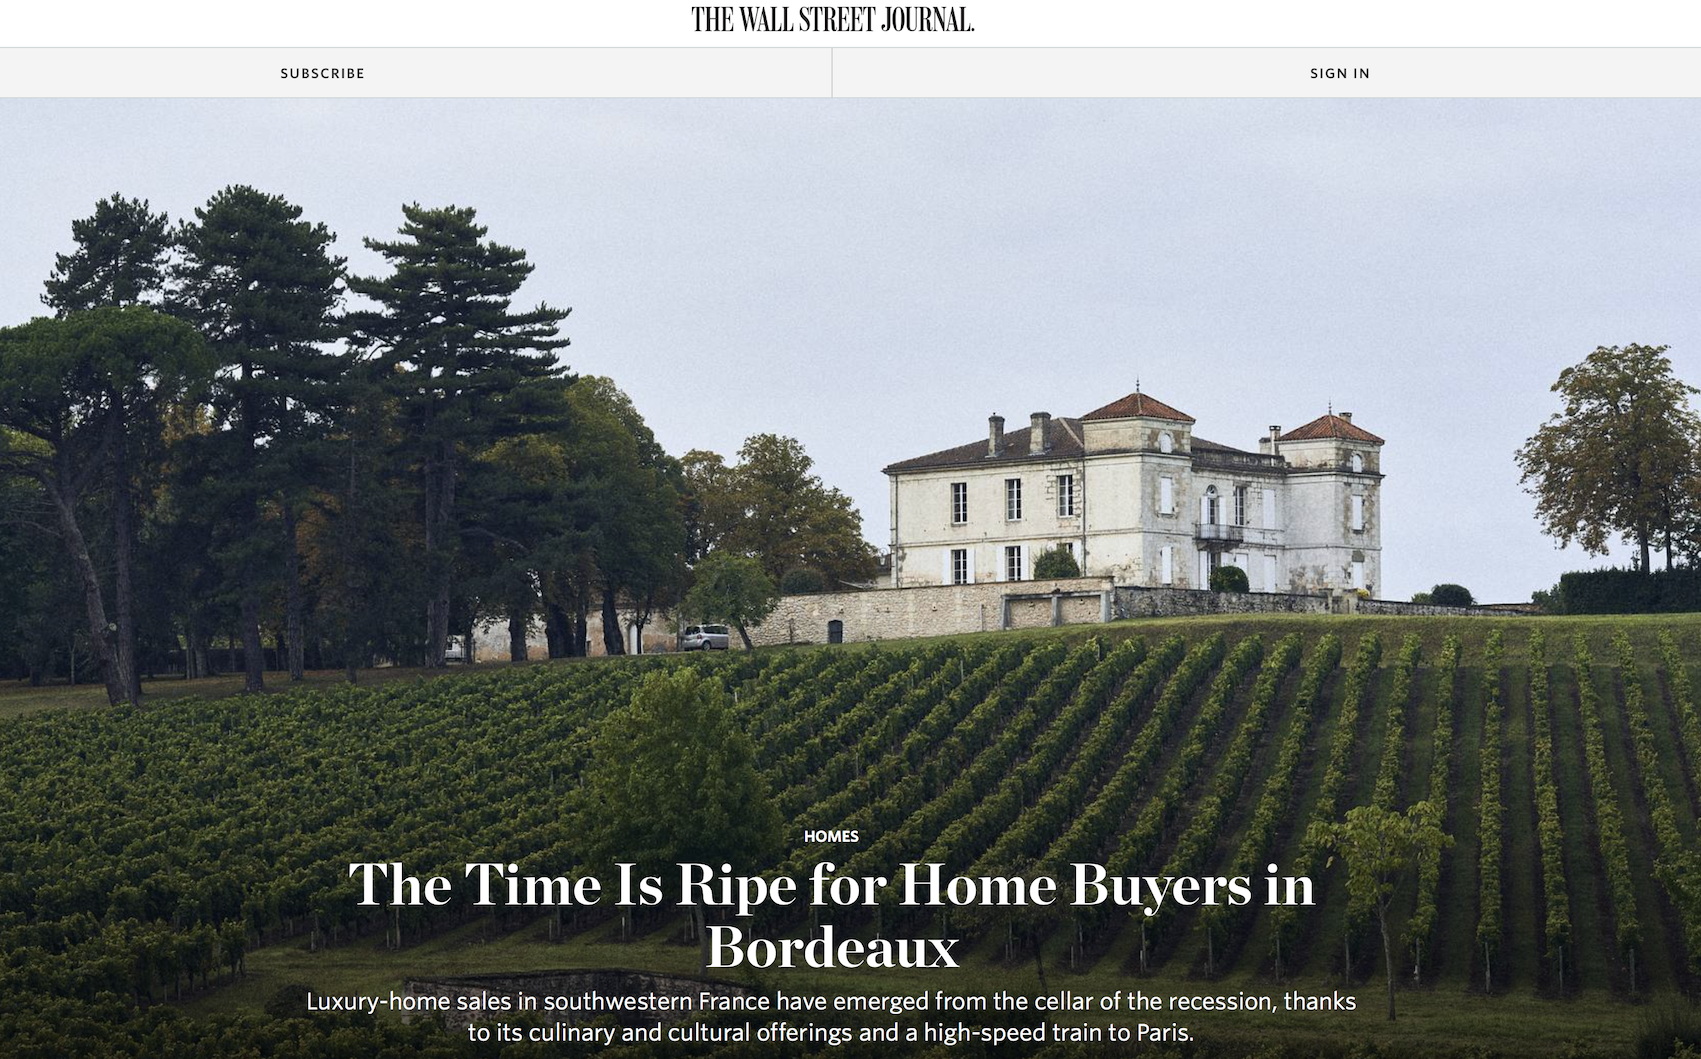 Wall Street Journal – Time is ripe to buy property in Bordeaux